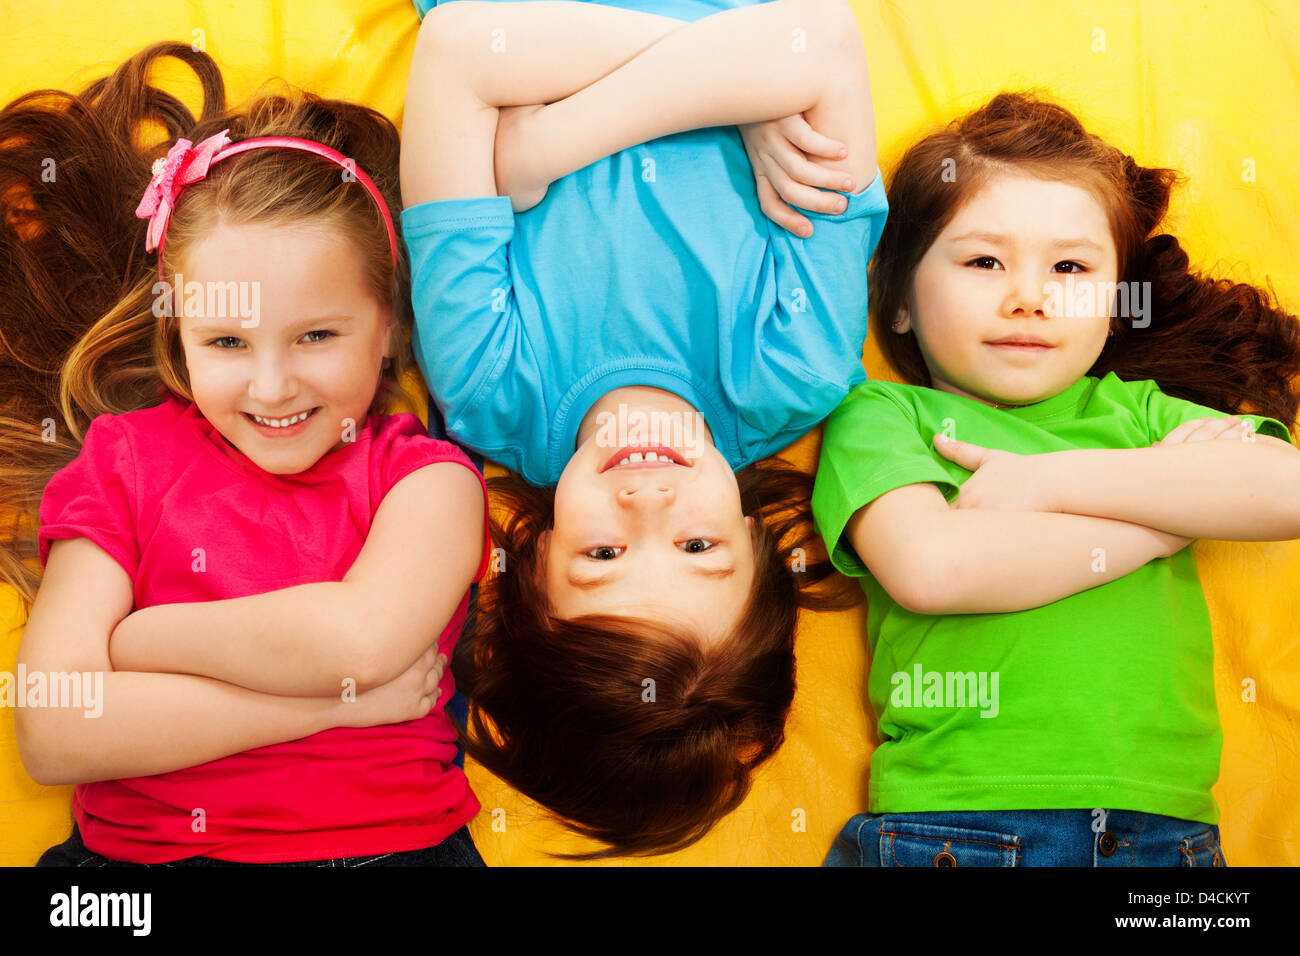 Three little kids, boys and girls, laying on the yellow mattress, smiling, with long hair, Stock Photo